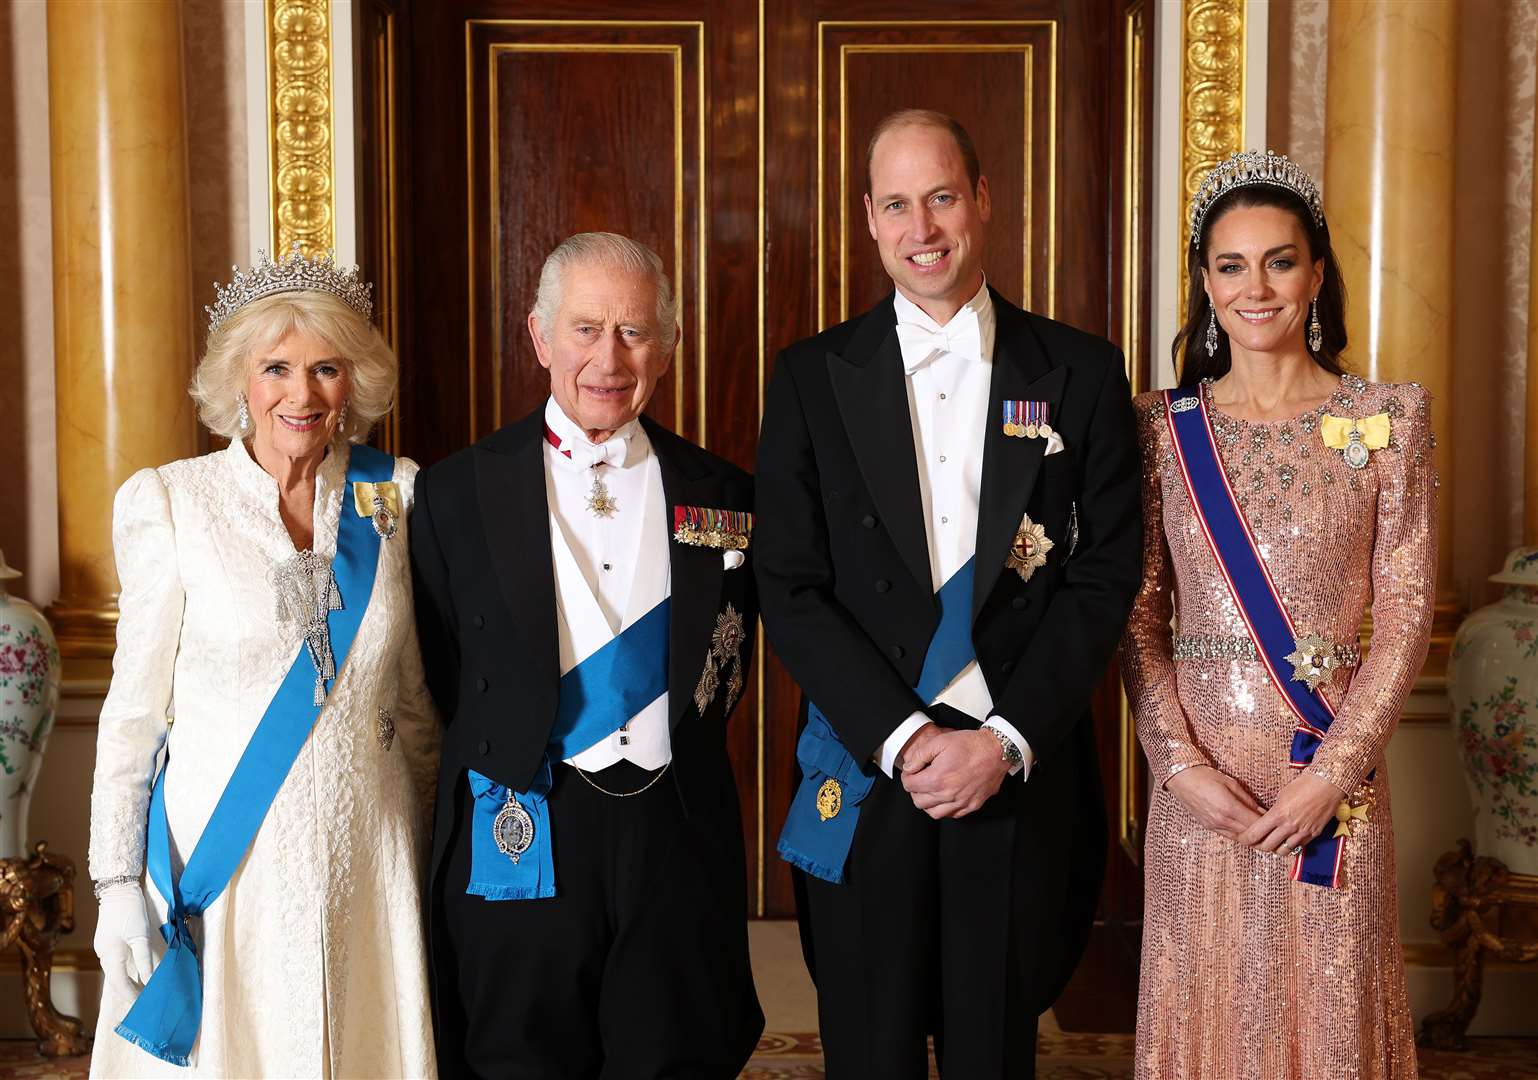 The royal family attended an annual reception at Buckingham Palace in what has been seen as a show of unity (Chris Jackson/PA)